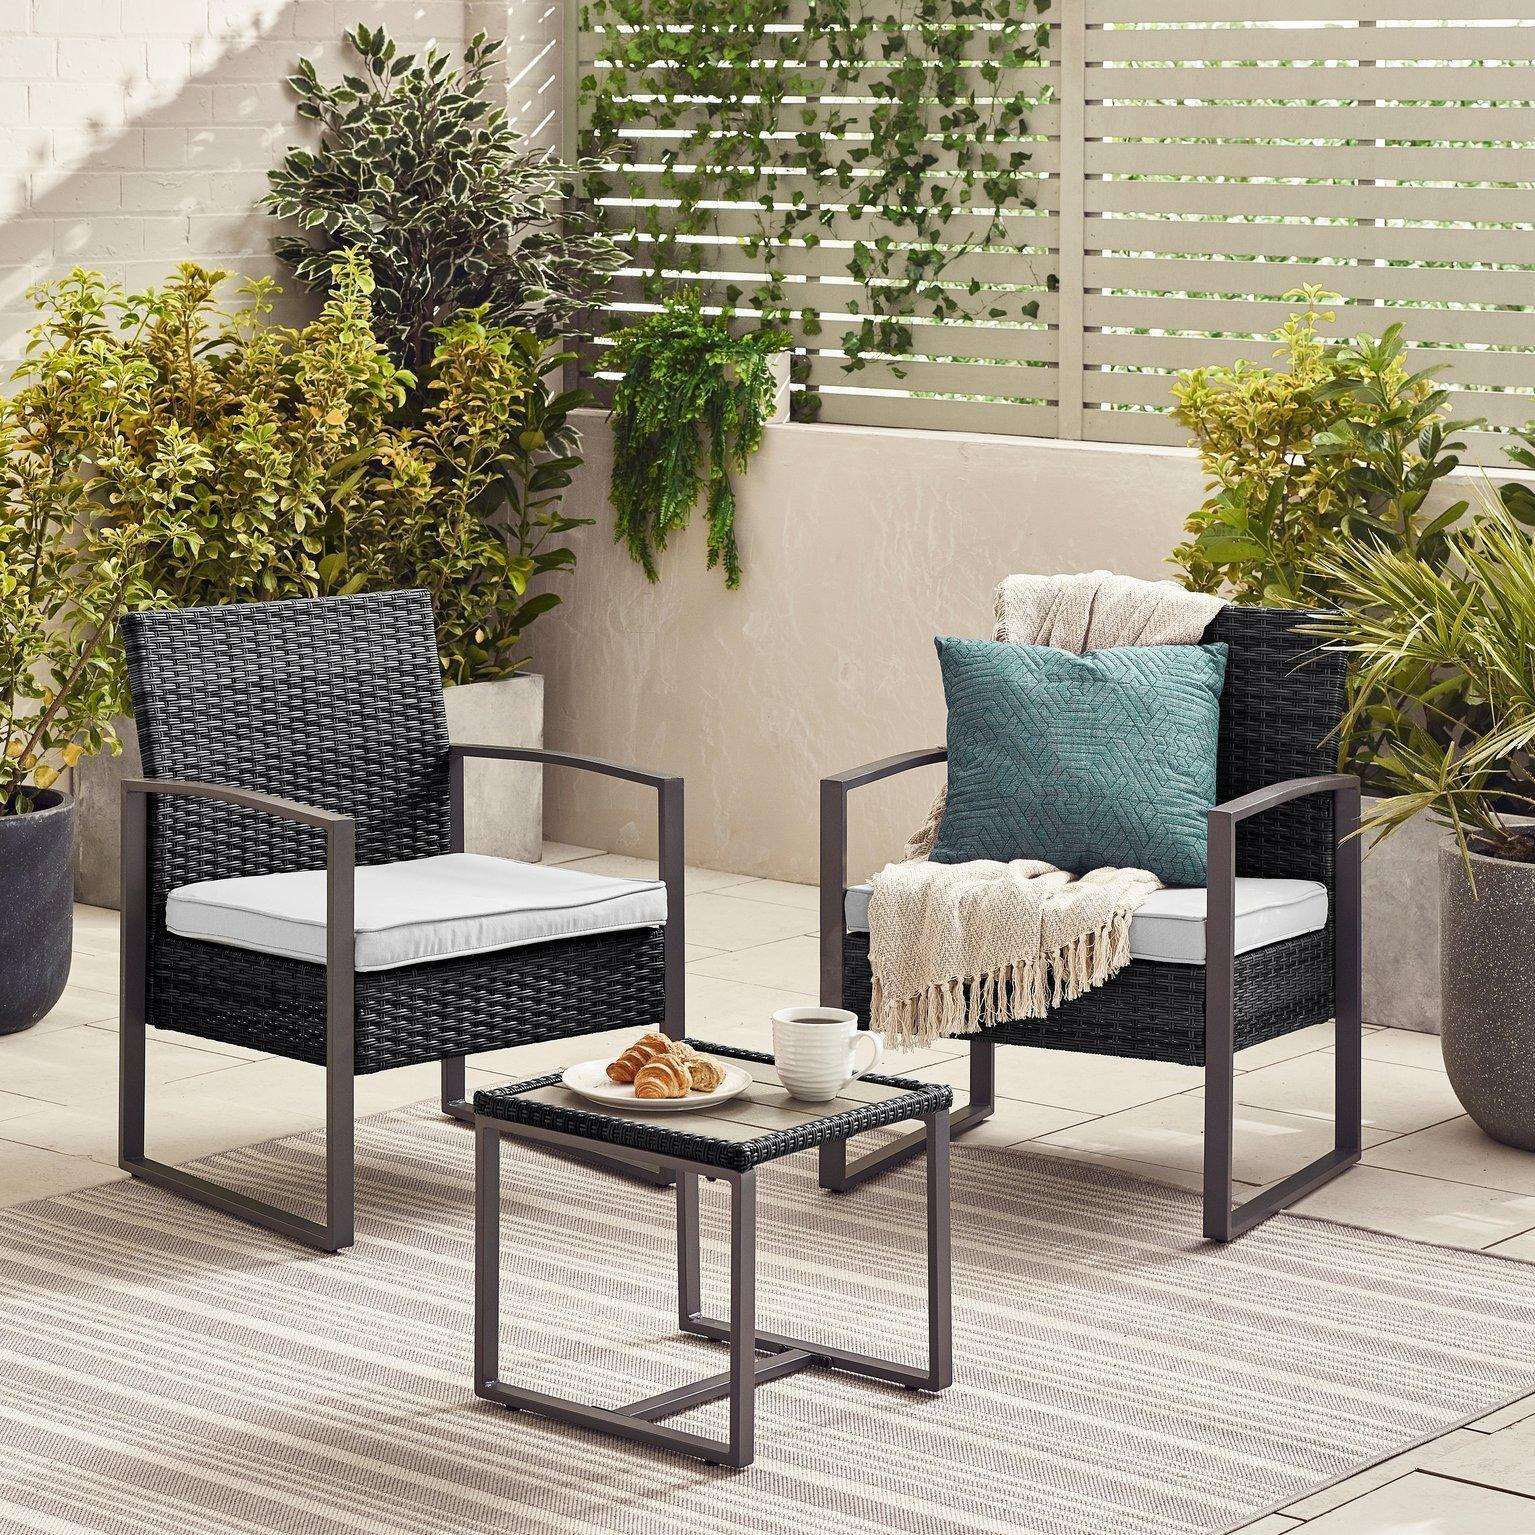 Algarve Grey PE Rattan 2 Seat Outdoor Garden Bistro Set, 2 Chairs, Square Coffee Table, Modern Industrial Style - image 1